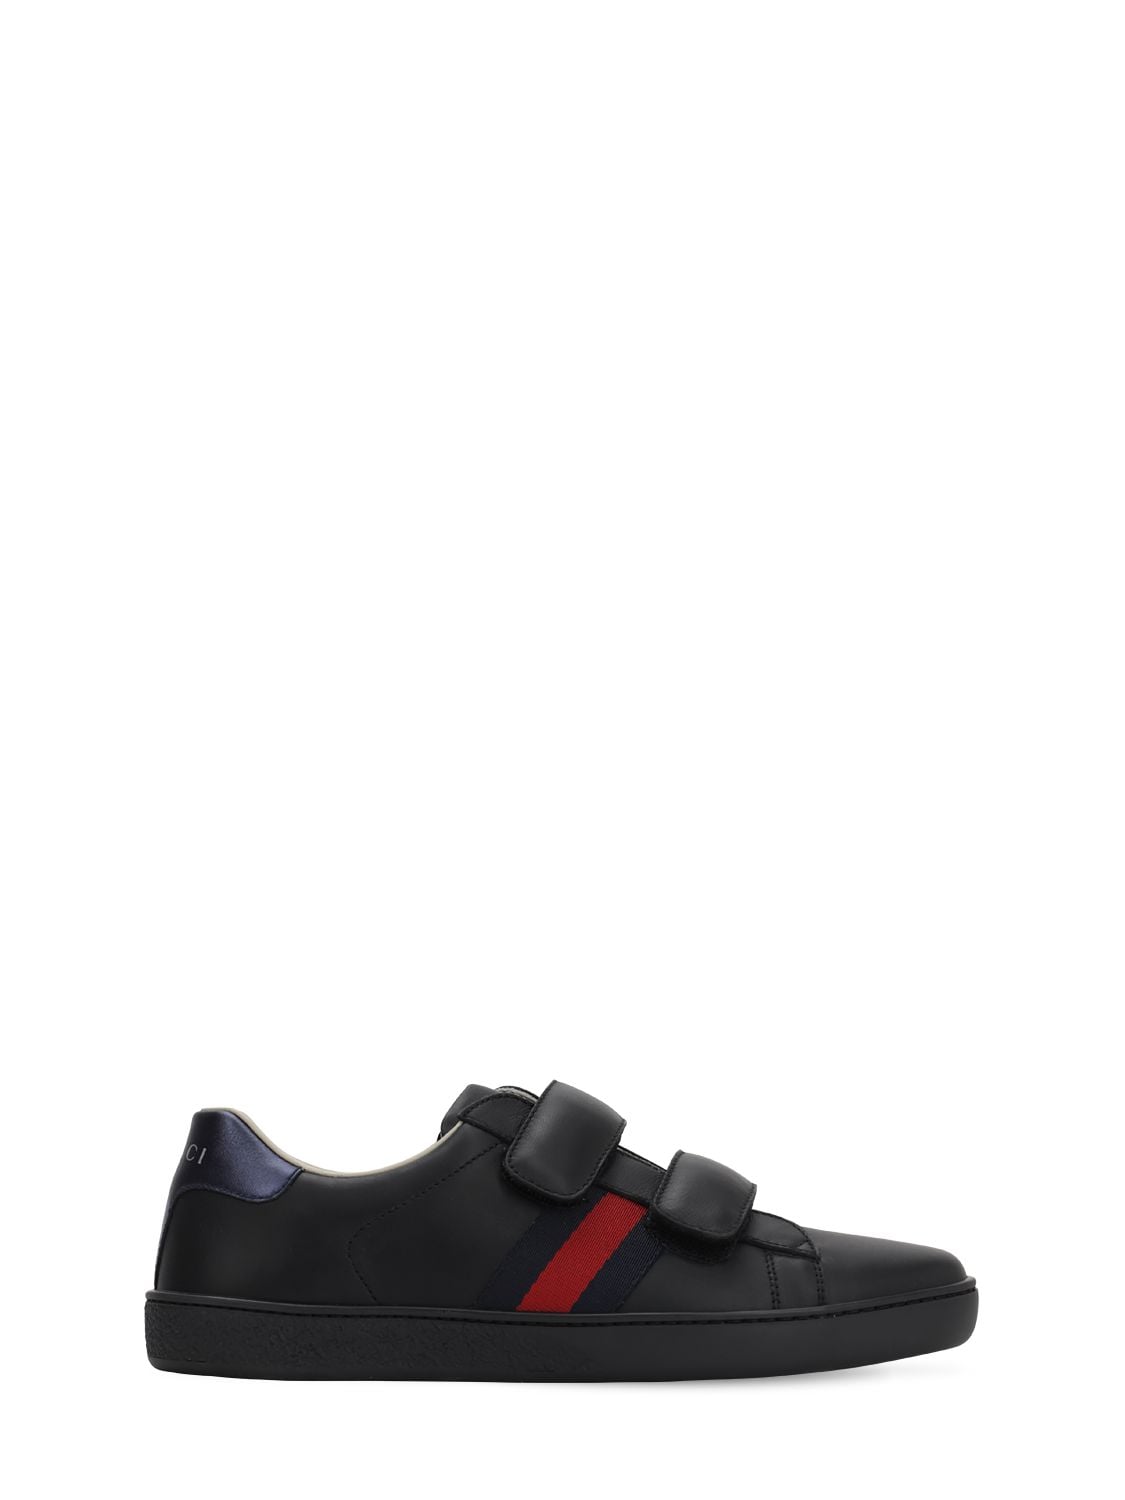 Gucci Kids' New Ace Leather Strap Sneakers In Black